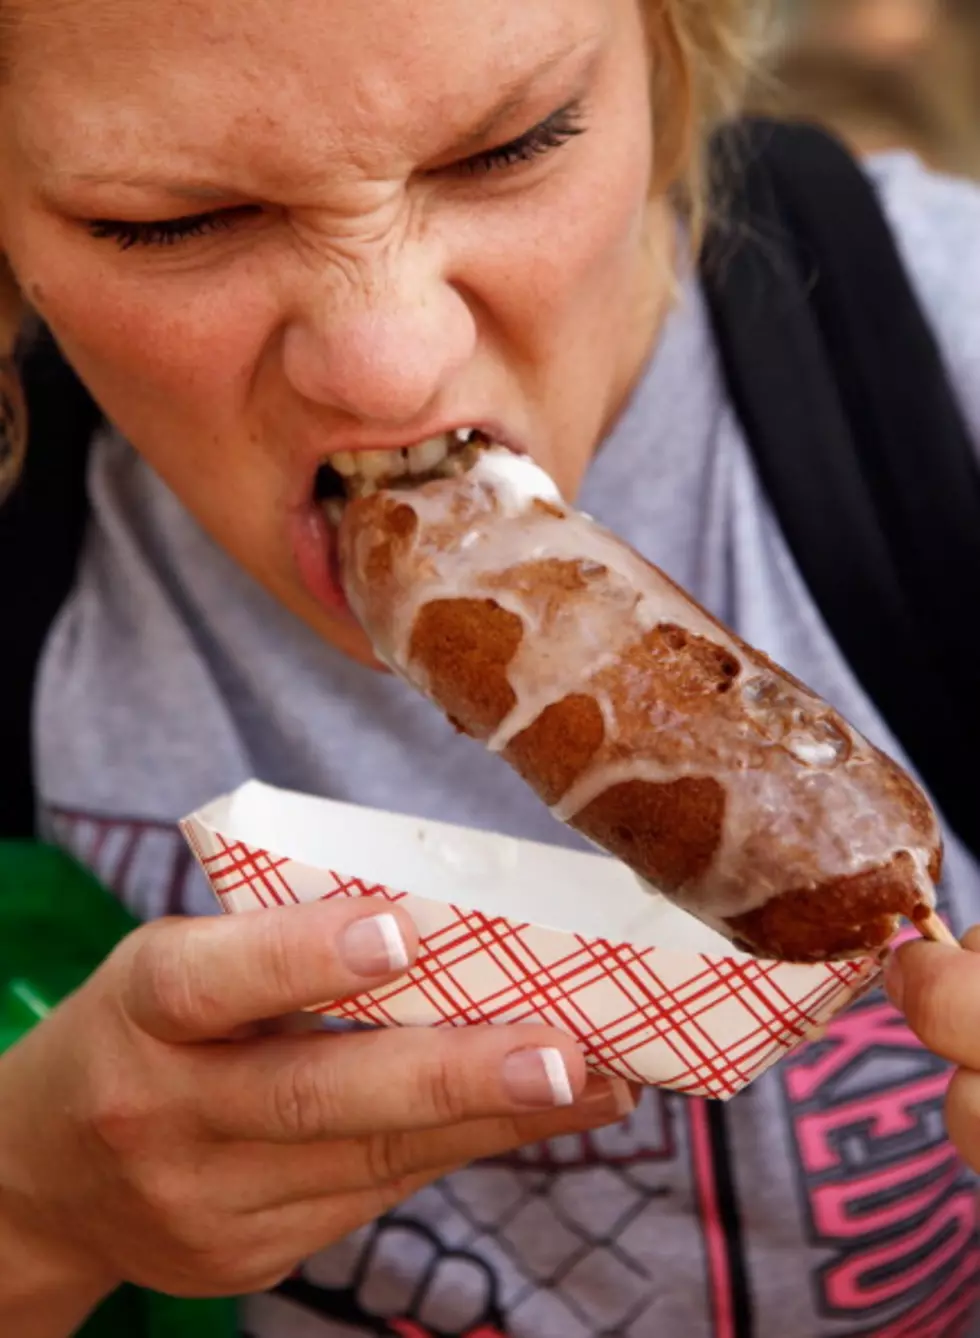 Maybe Re-think What You Are Eating at the Fair&#8230;